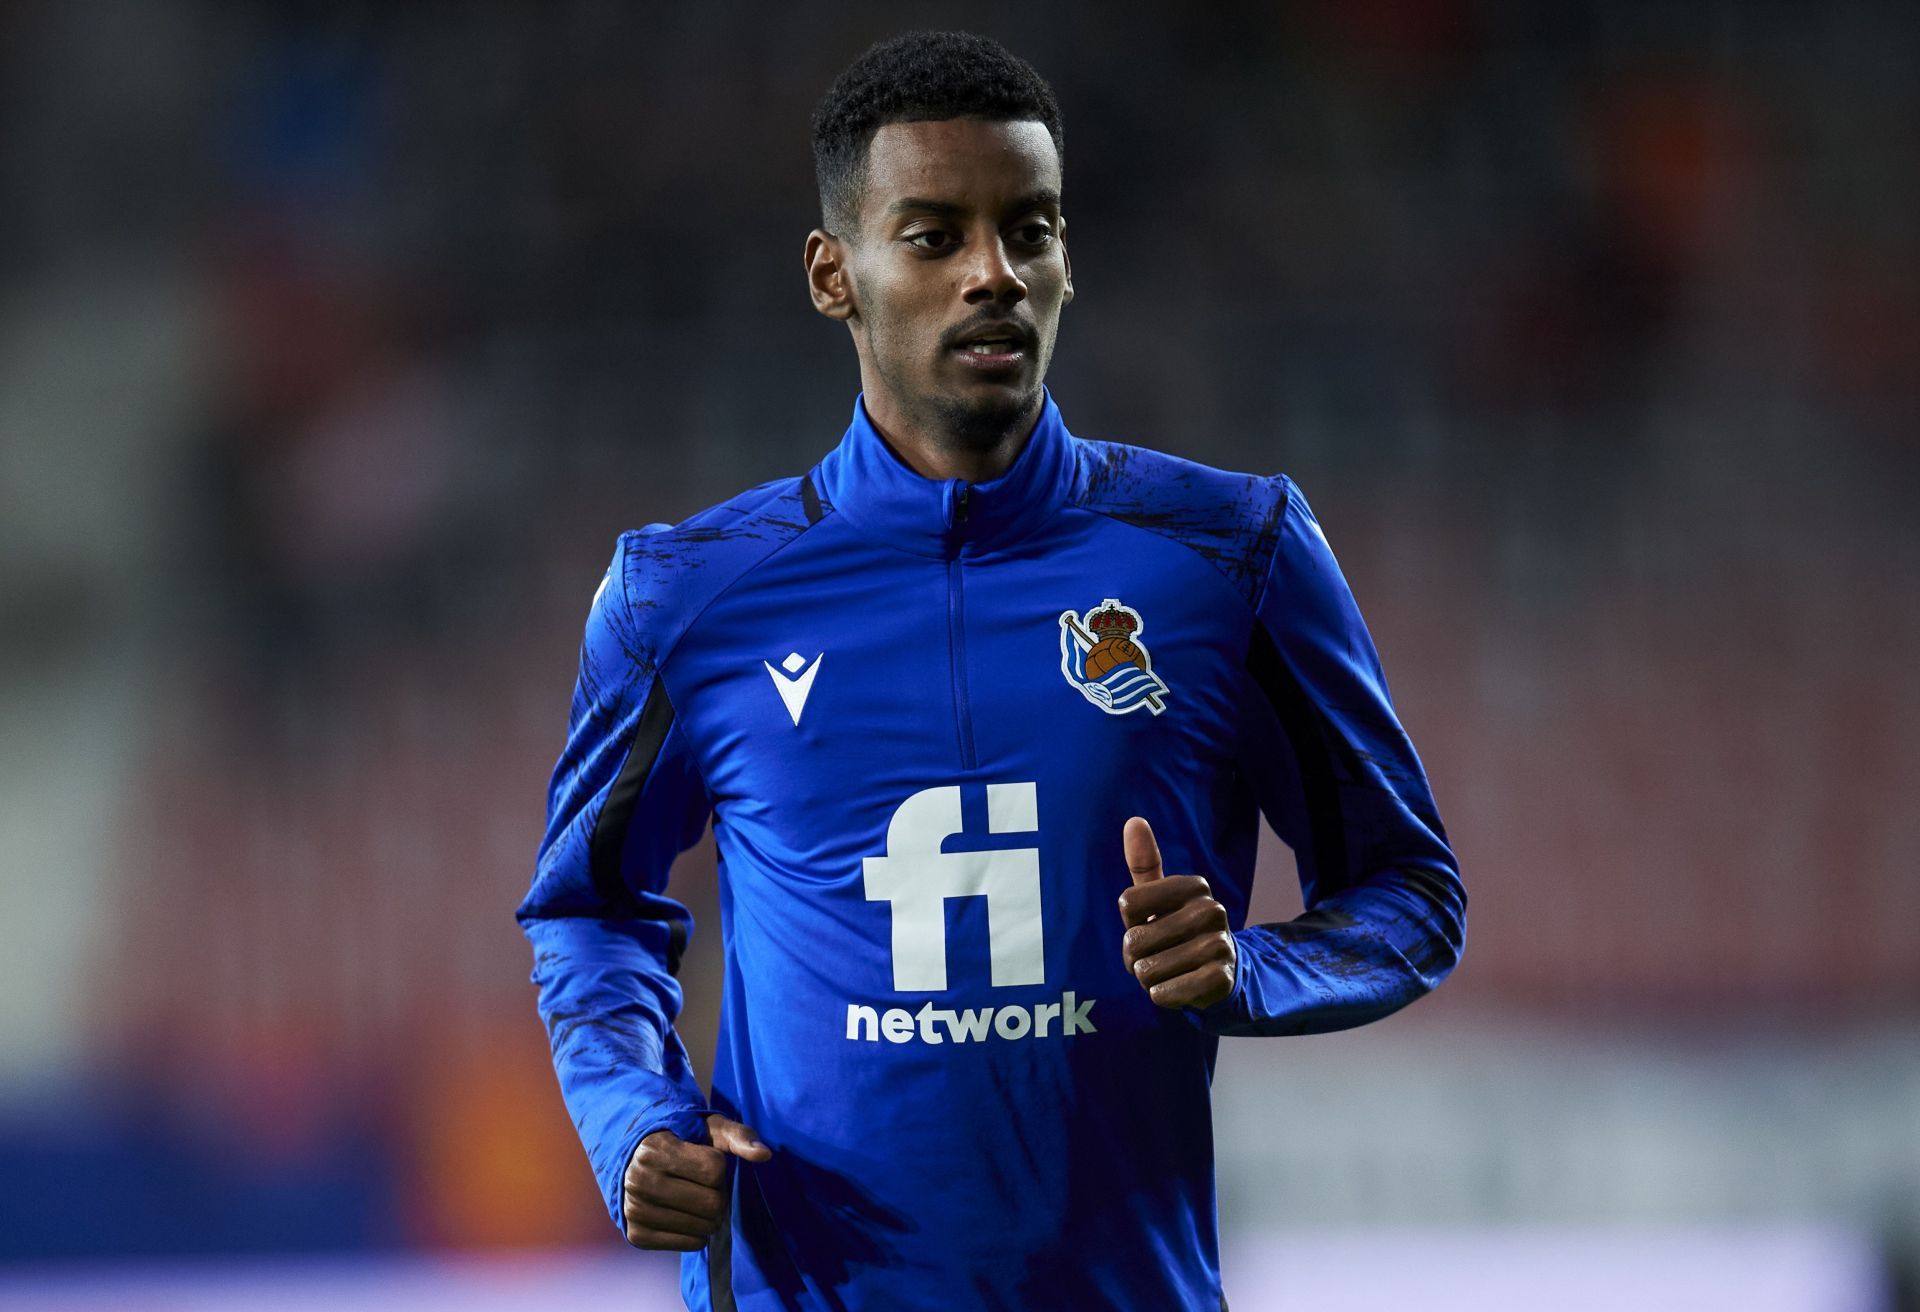 Arsenal are leading the race to sign Alexander Isak.